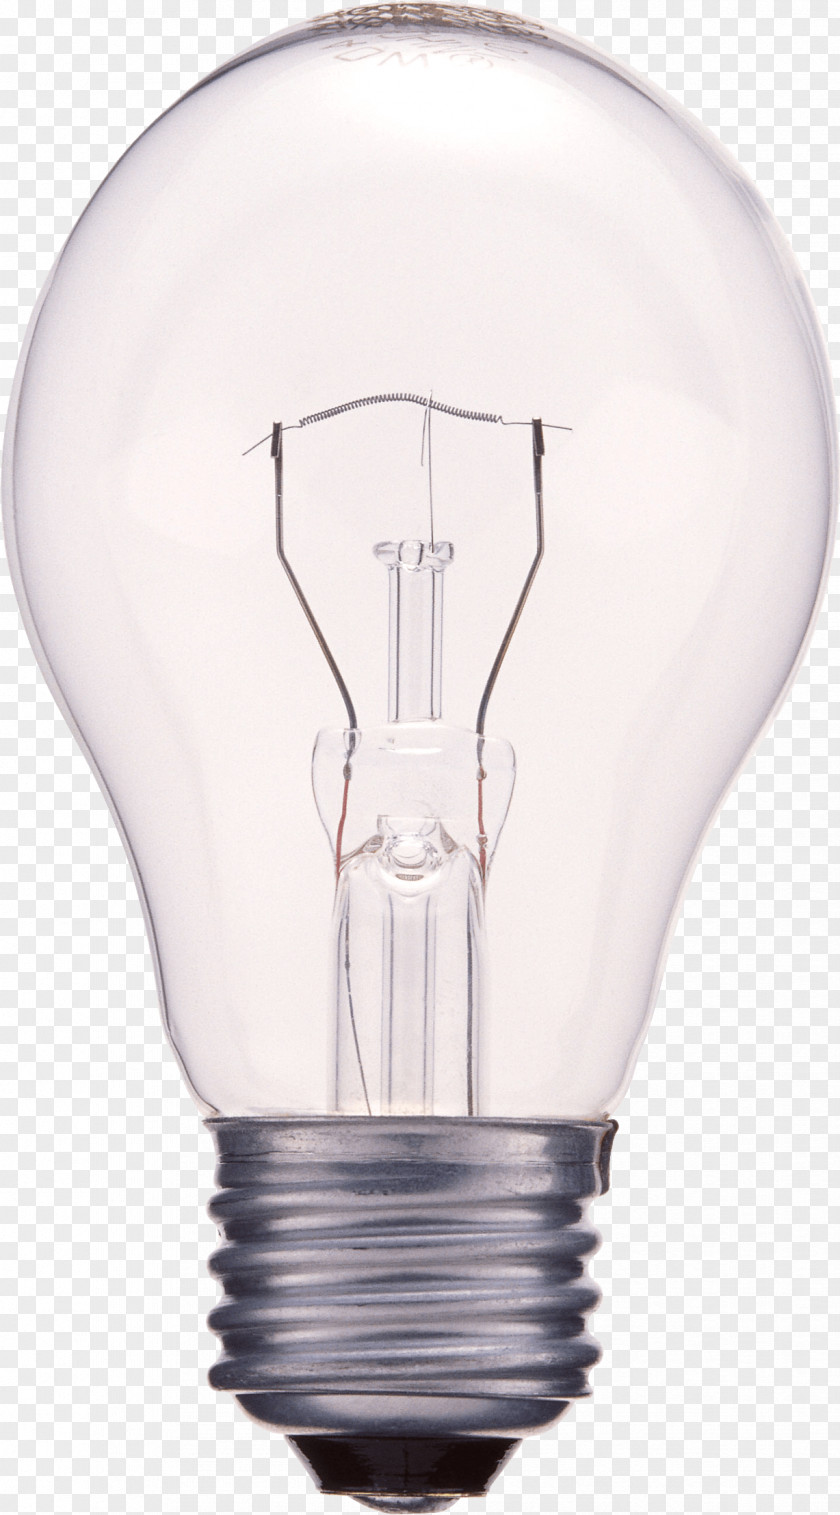 Electric Lamp Image Incandescent Light Bulb Hard And Soft Background Stock Photography PNG